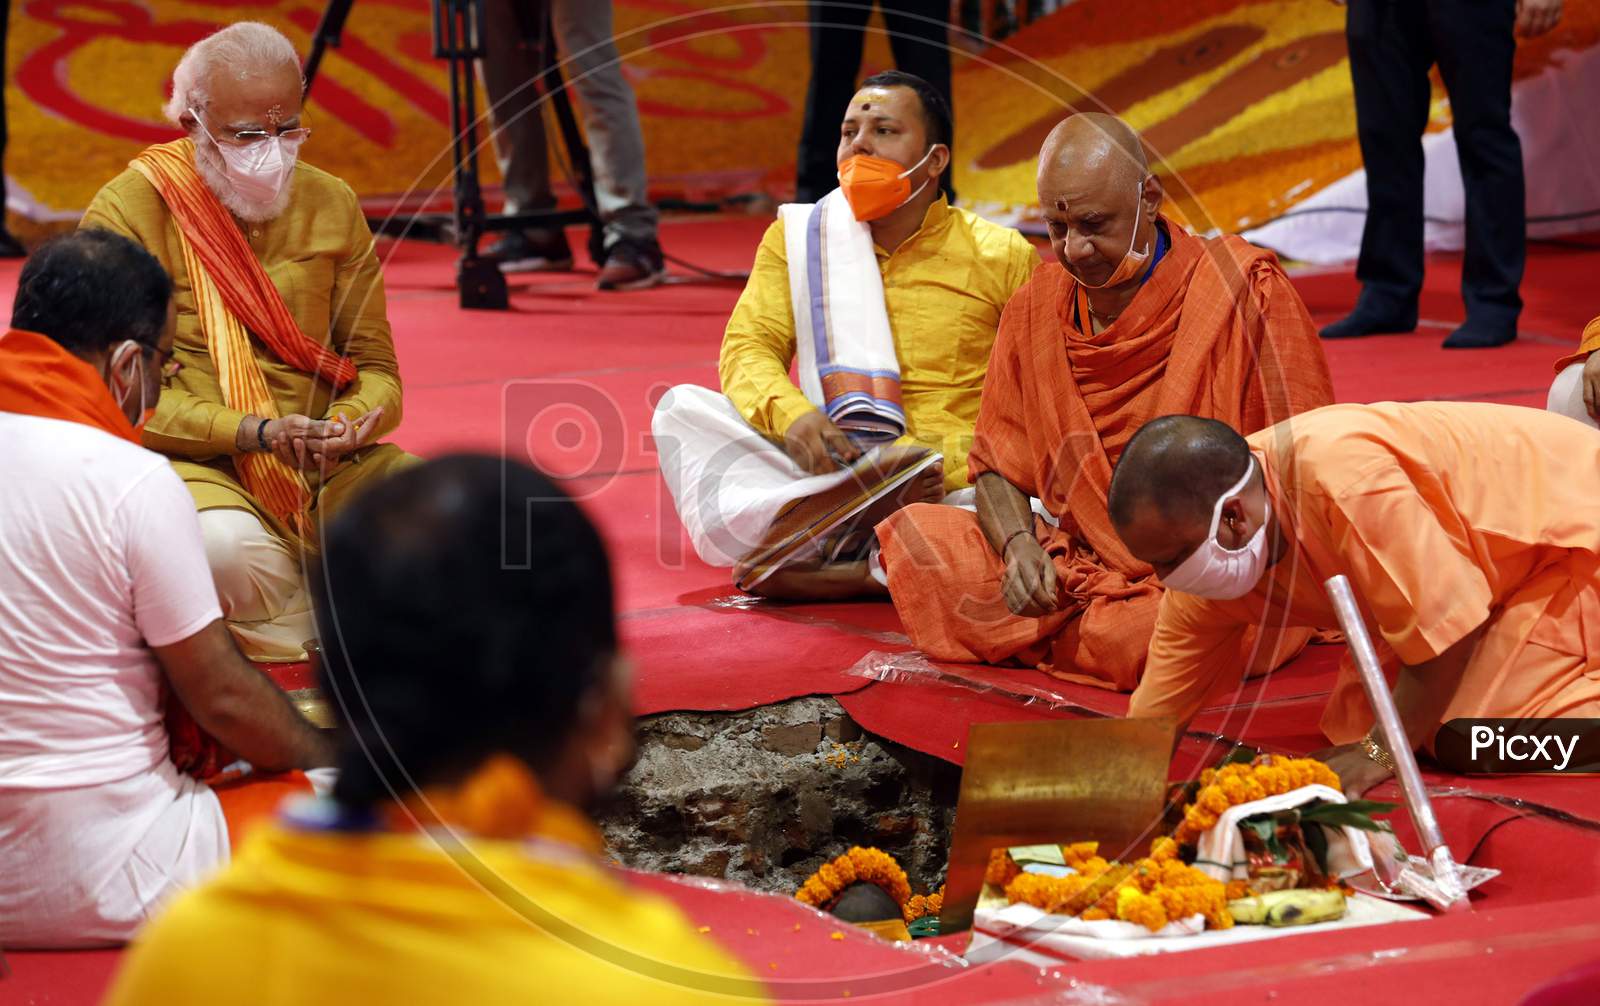 Prime Minister Narendra Modi and Uttar Pradesh Chief Minister Yogi Adityanath perform rituals during the foundation laying ceremony for the Hindu Lord Ram's temple, in Ayodhya, India, August 5, 2020.